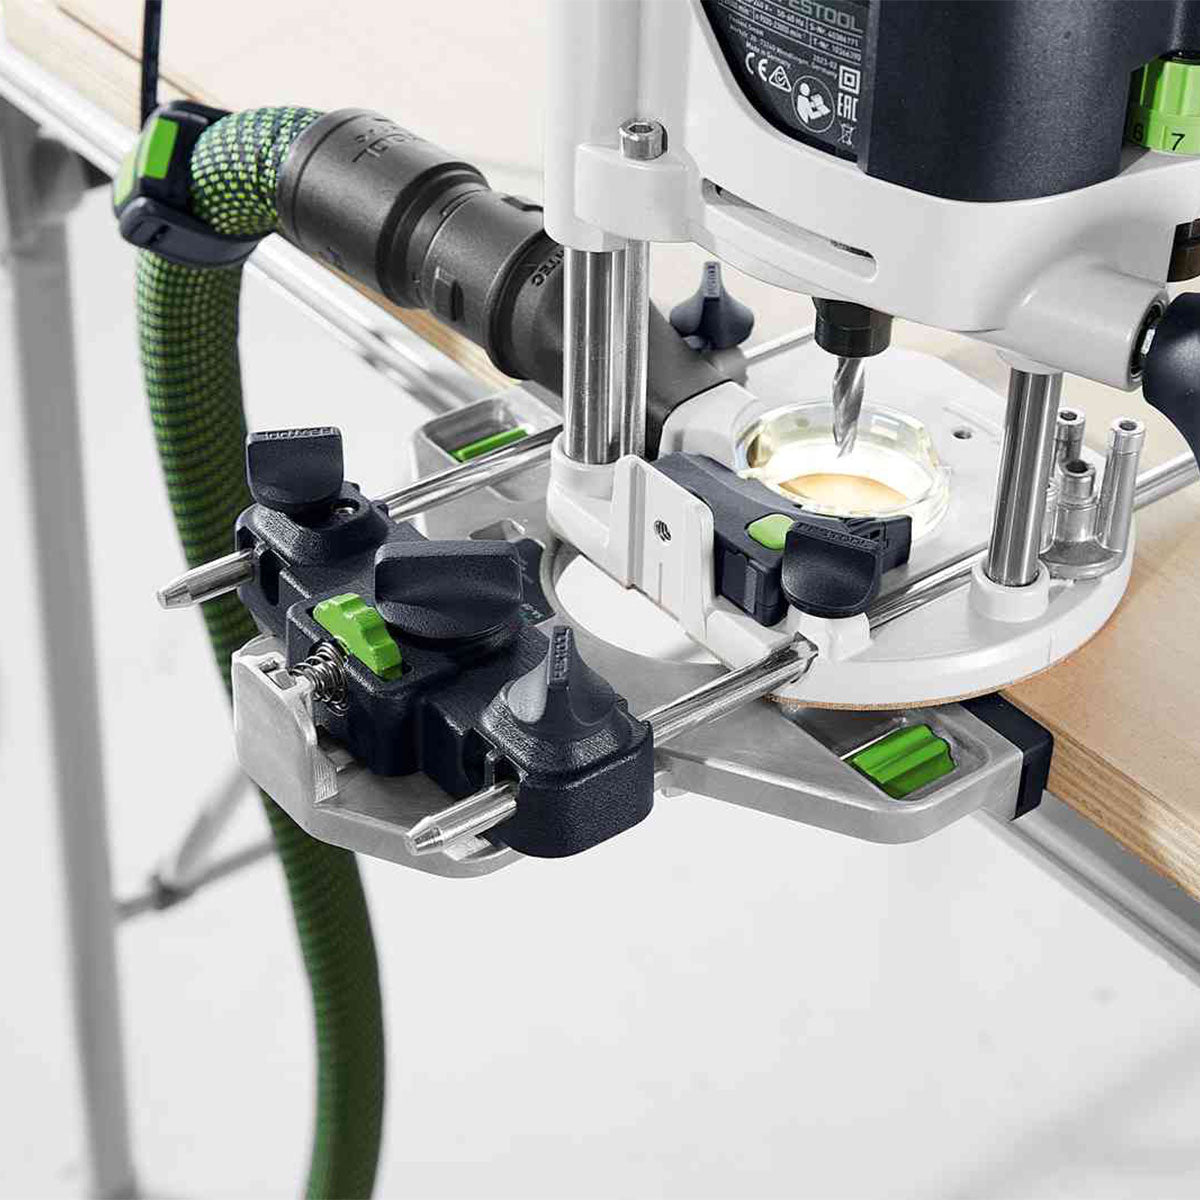 Festool OF 1010 REBQ-Plus 230V GB Router Cutter - 578004 With ZS-OF 1010 M Router Accessories Set